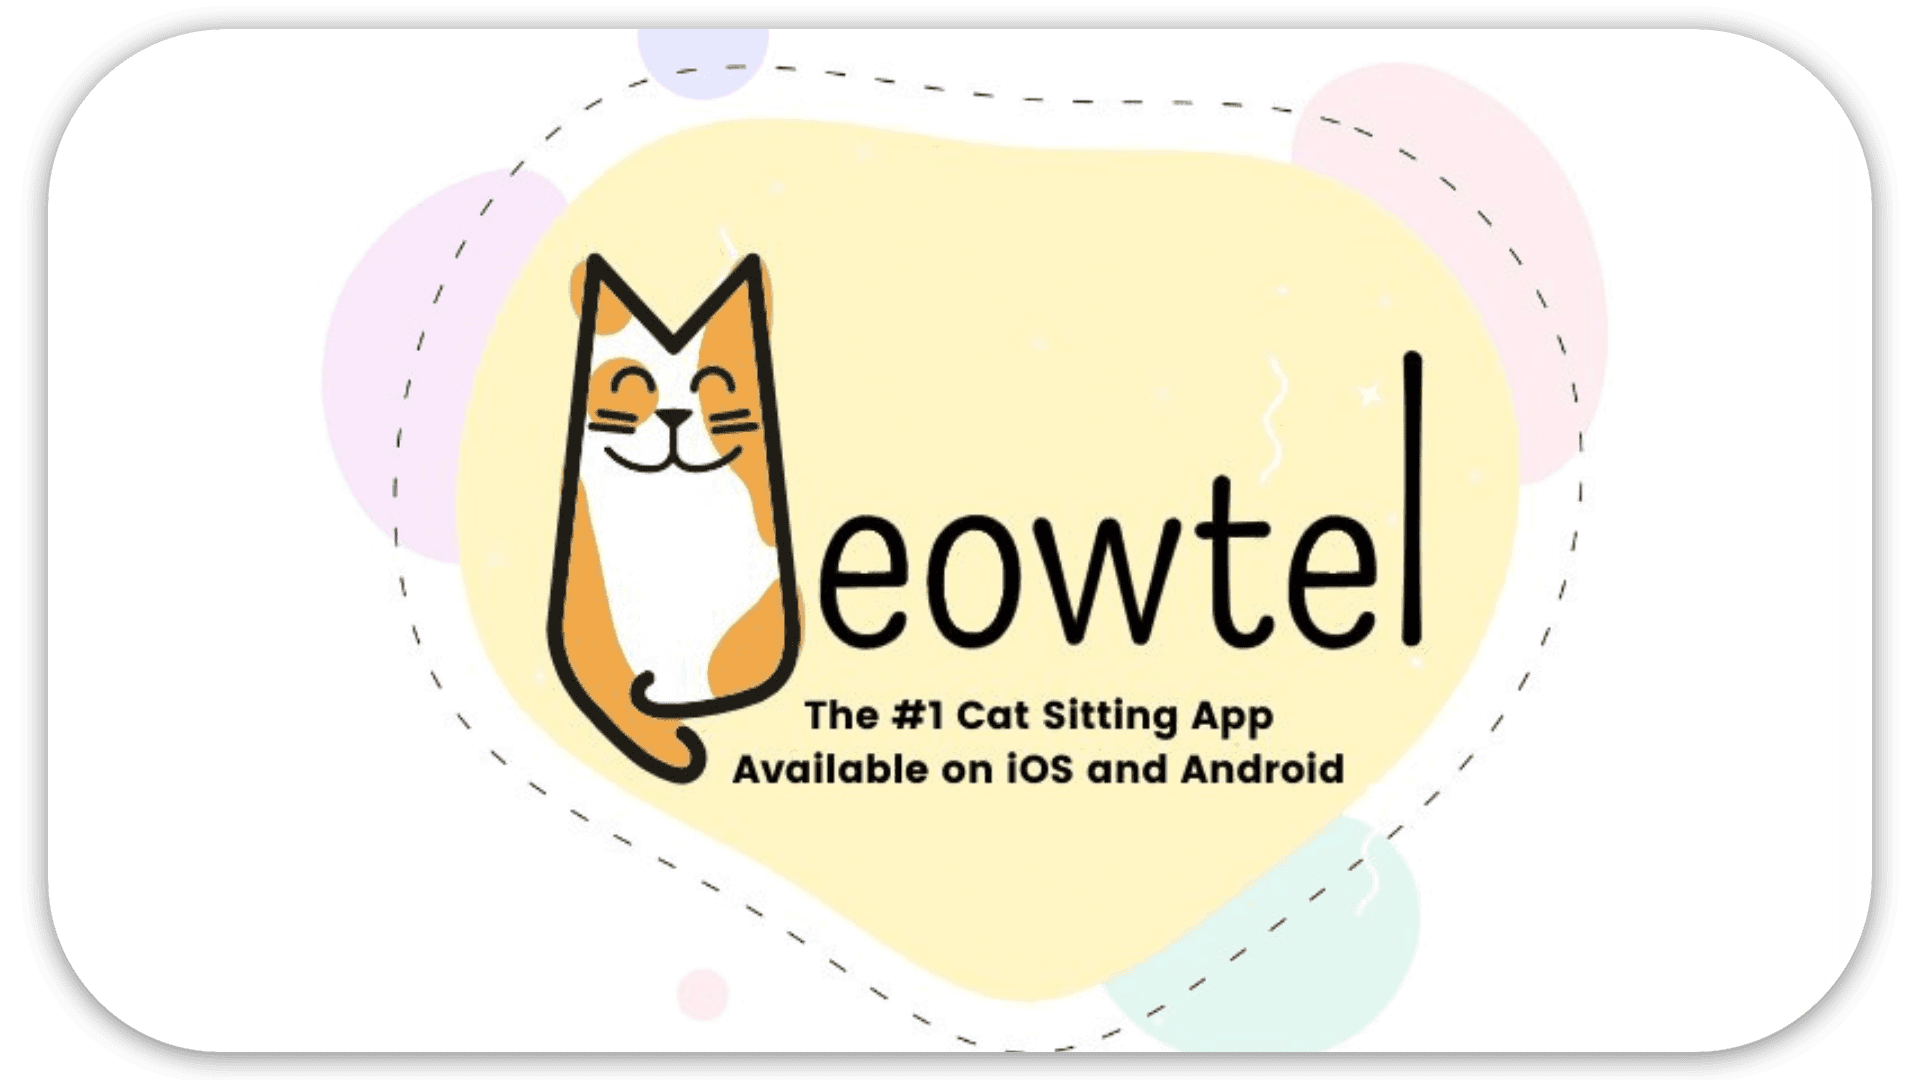 Logo for "Meowtel," a cat sitting app, featuring a happy cat.